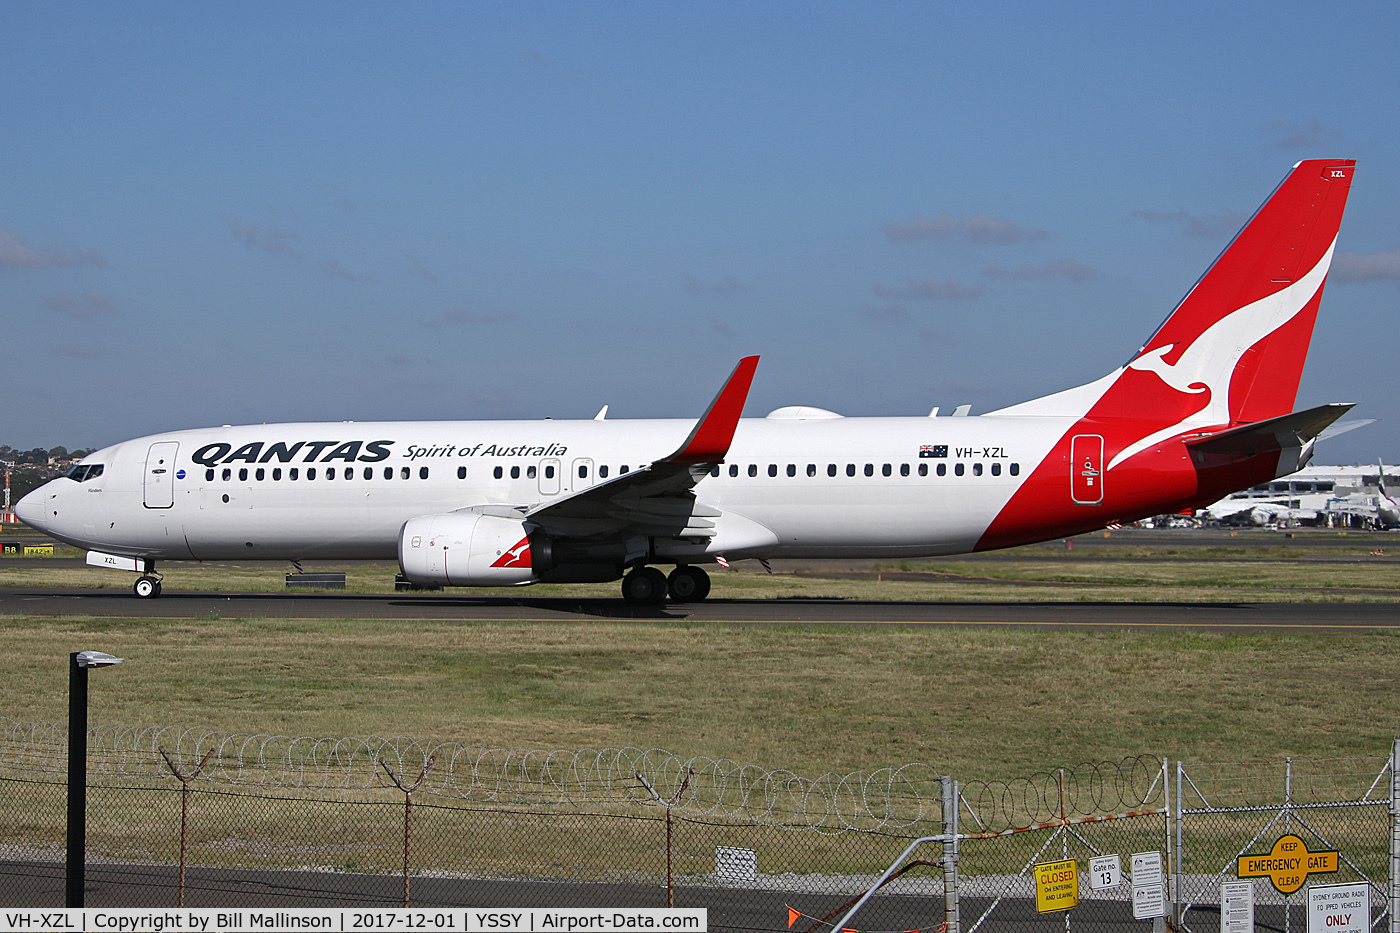 VH-XZL, 2014 Boeing 737-838 C/N 44573, TAXI TO 34R